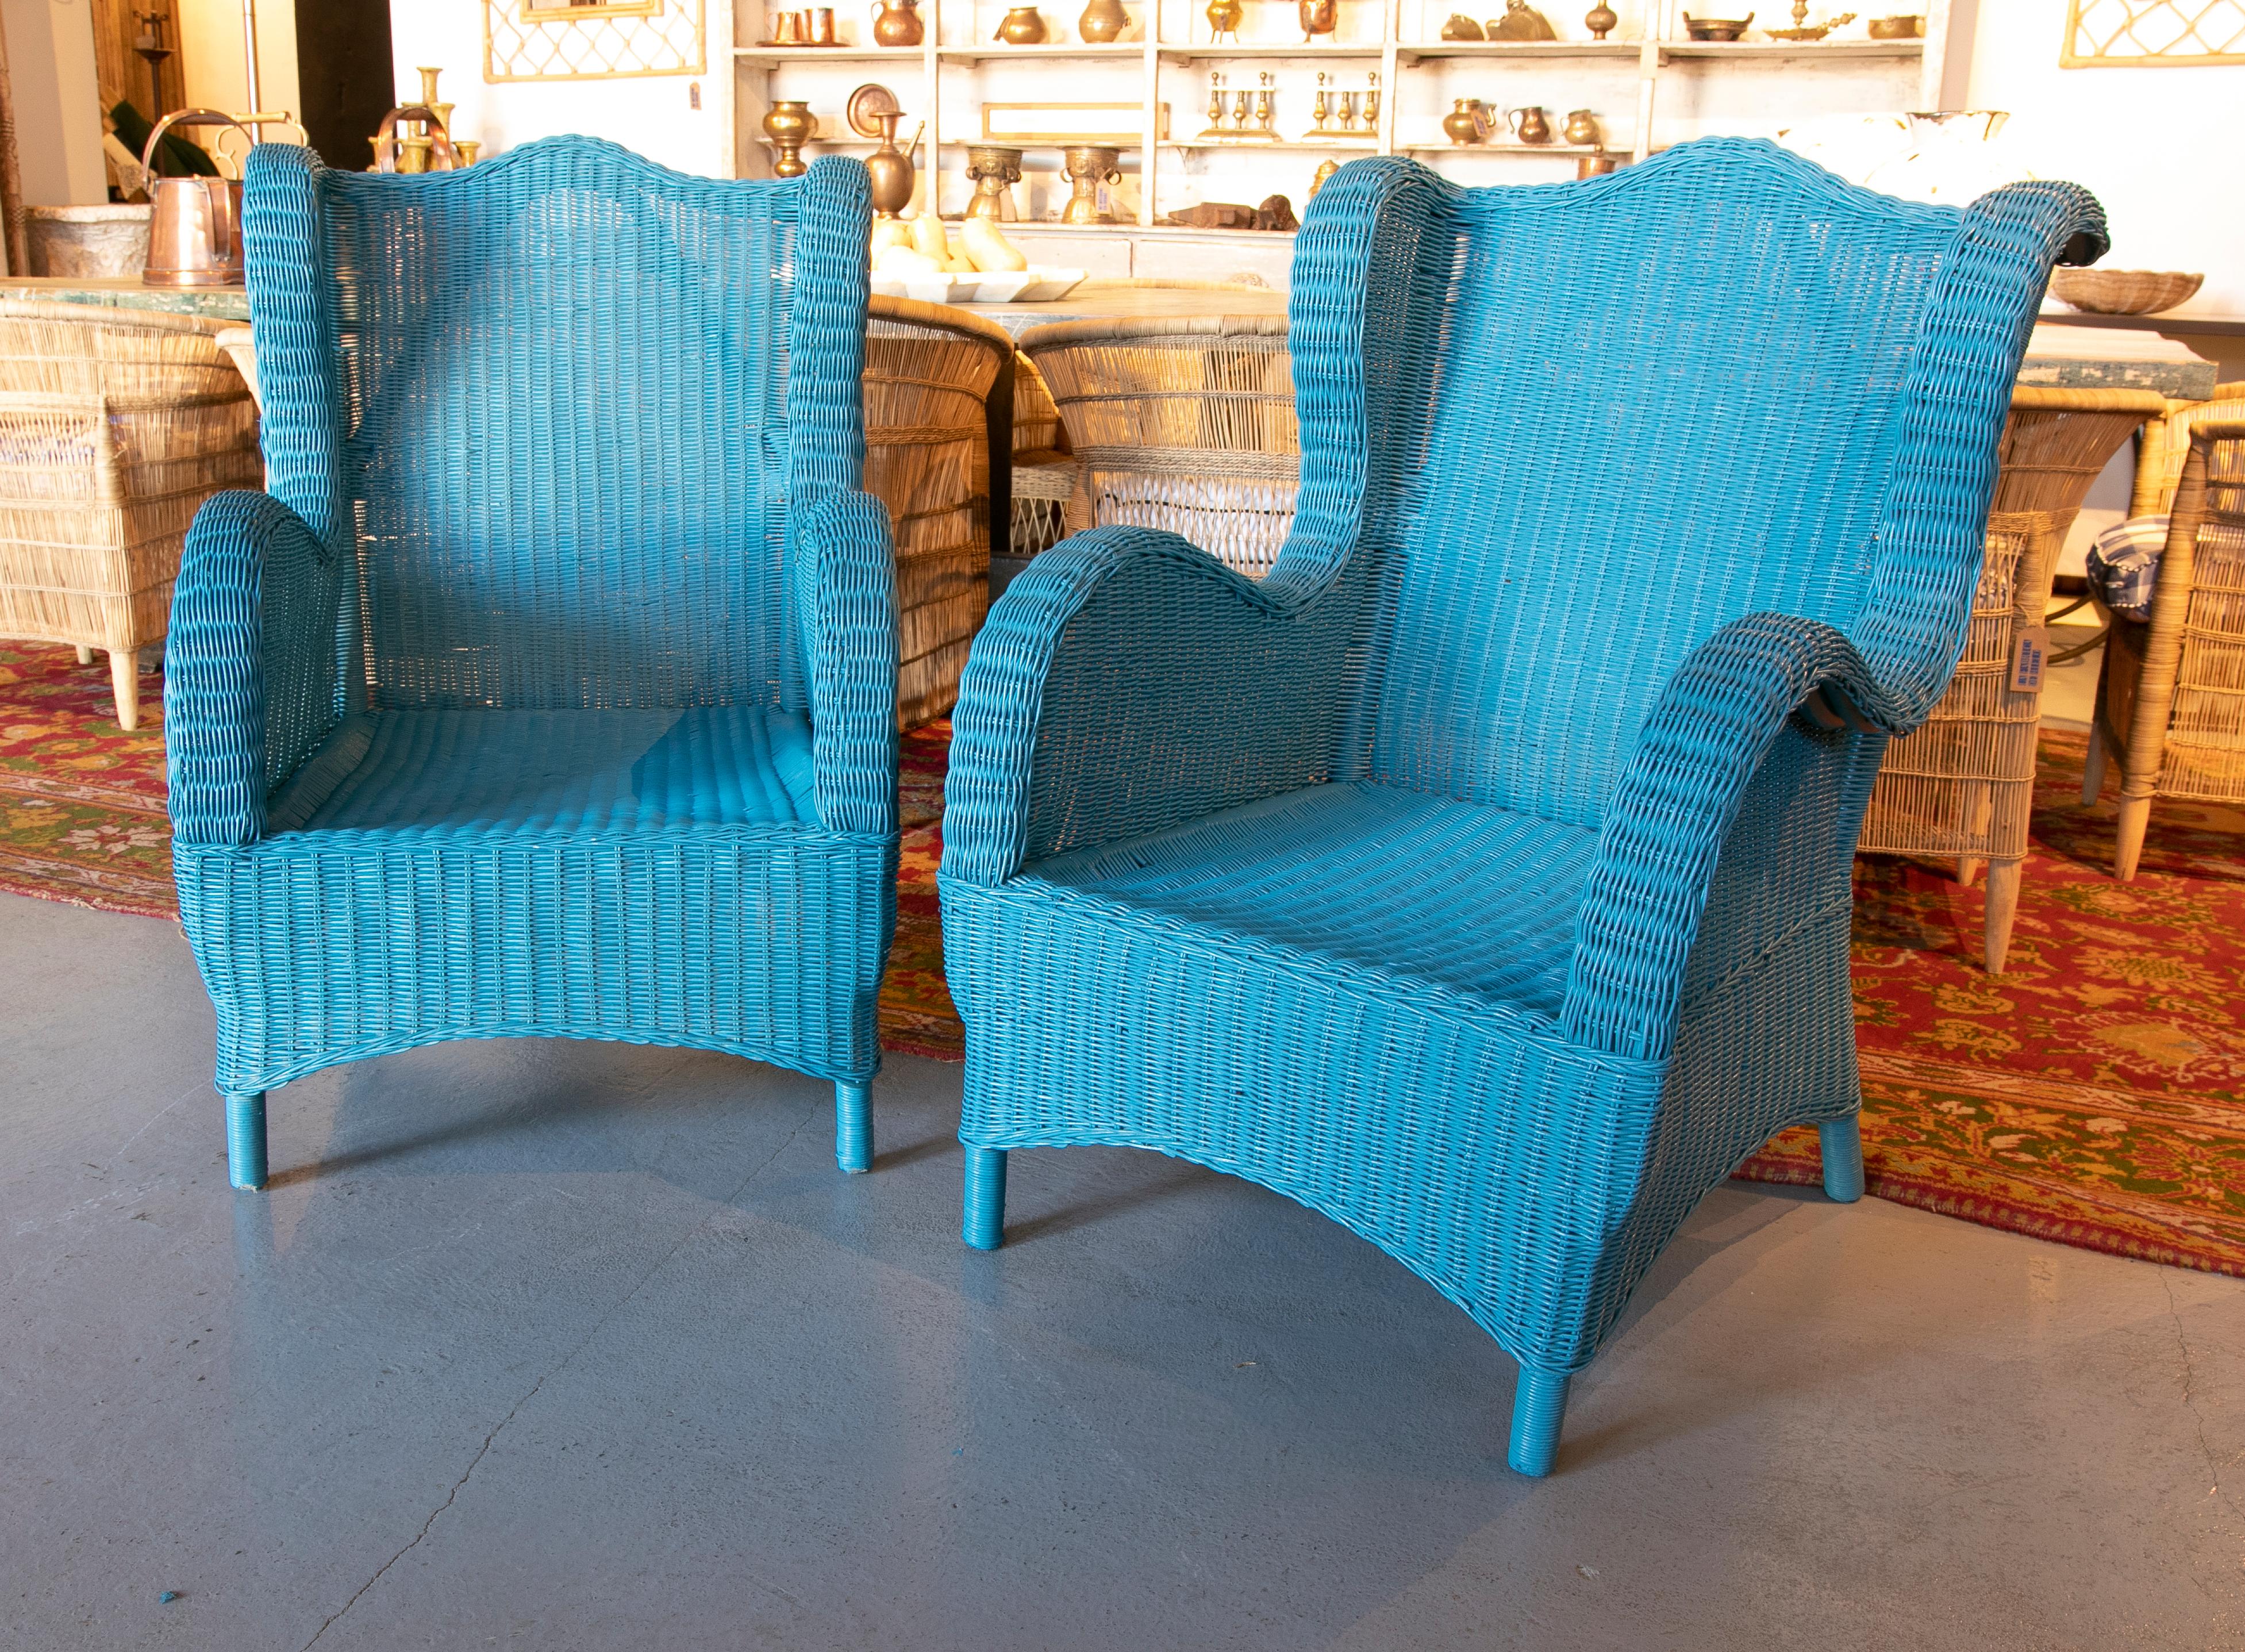 1970s Spanish pair of wicker armchairs painted in blue.